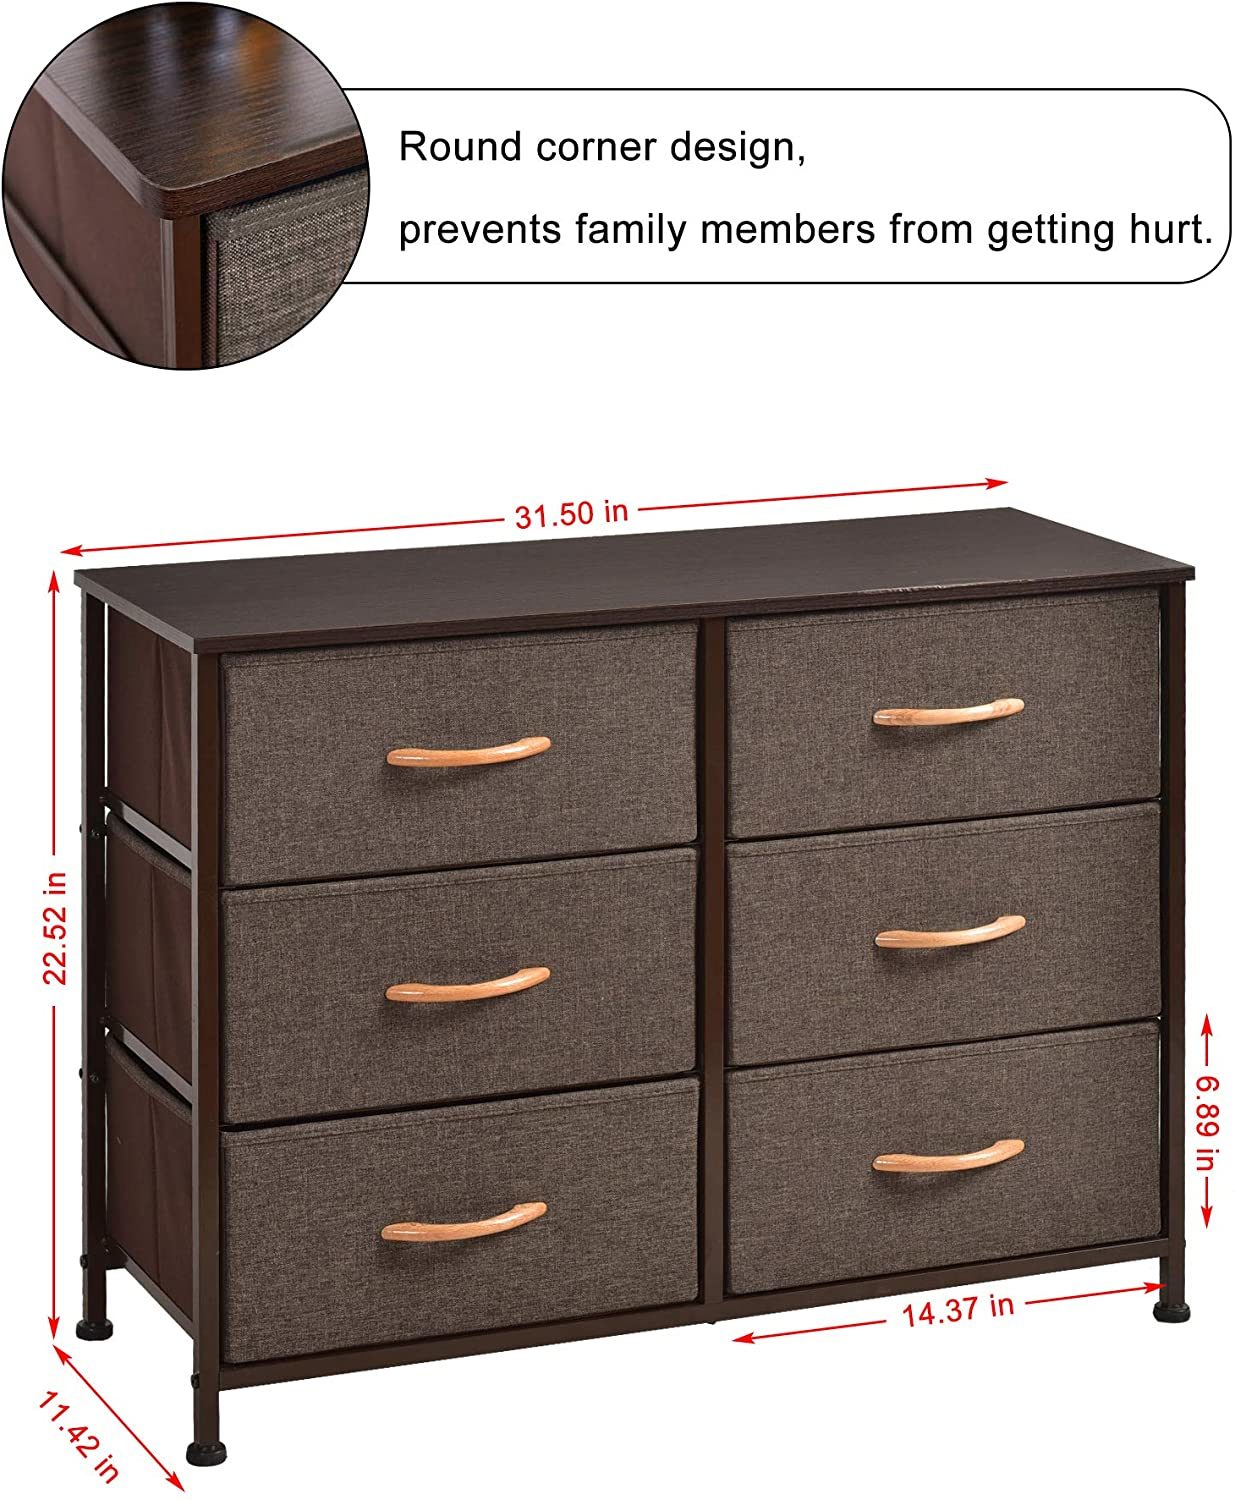 Dresser Closet with 6 Drawers, Storage Tower Unit for Bedroom, Hallway, Closet, Office Organization, Wood Top, Easy Pull Fabric Bins - Brown